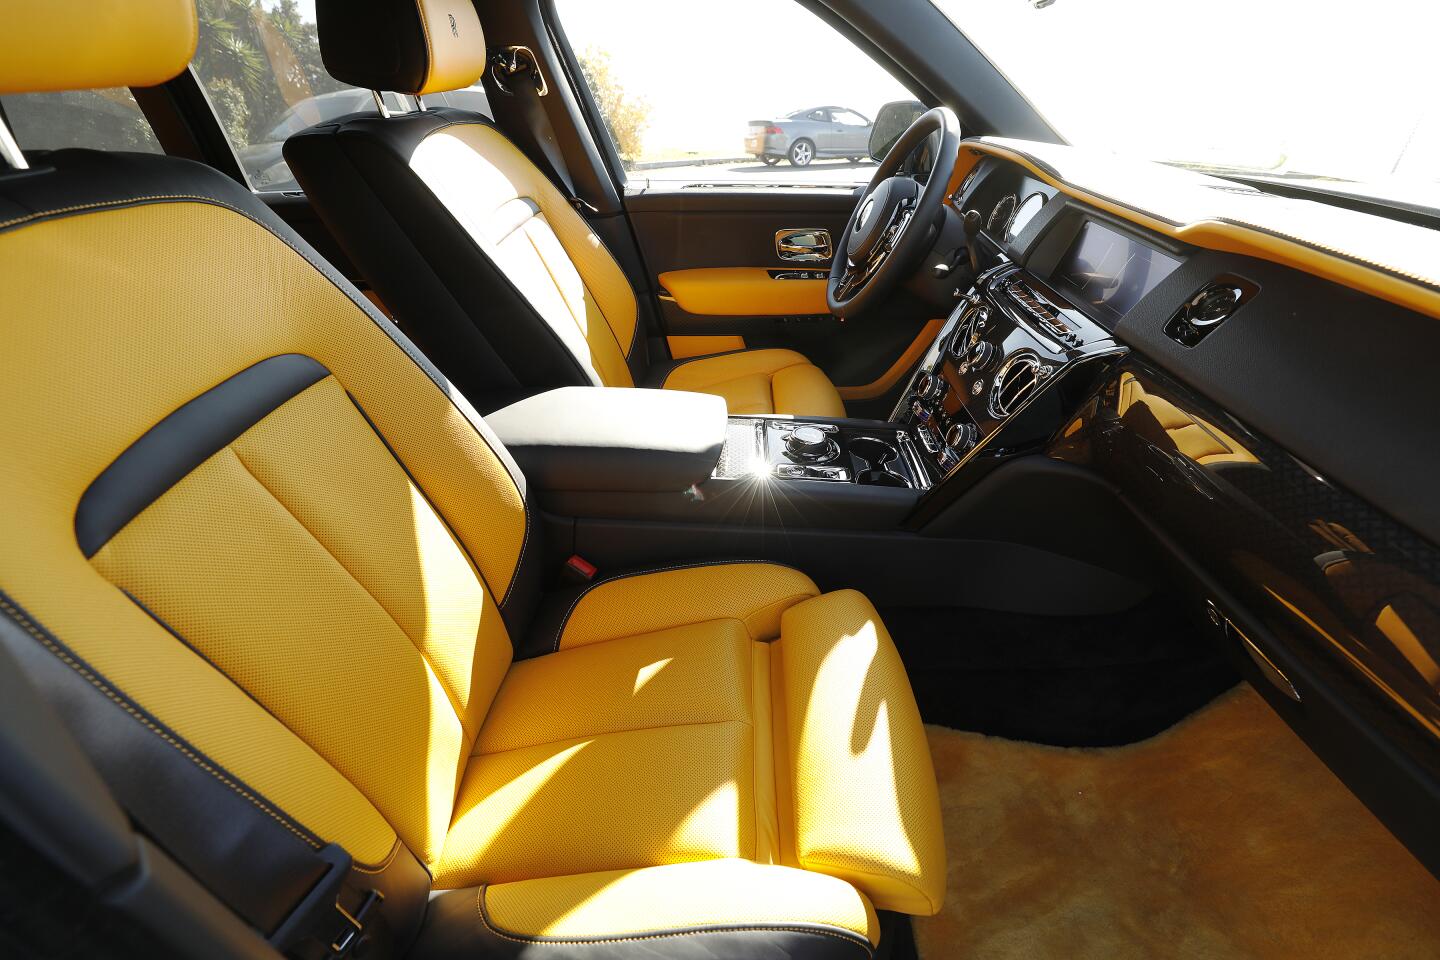 The black and yellow interior of the Rolls-Royce Cullinan.